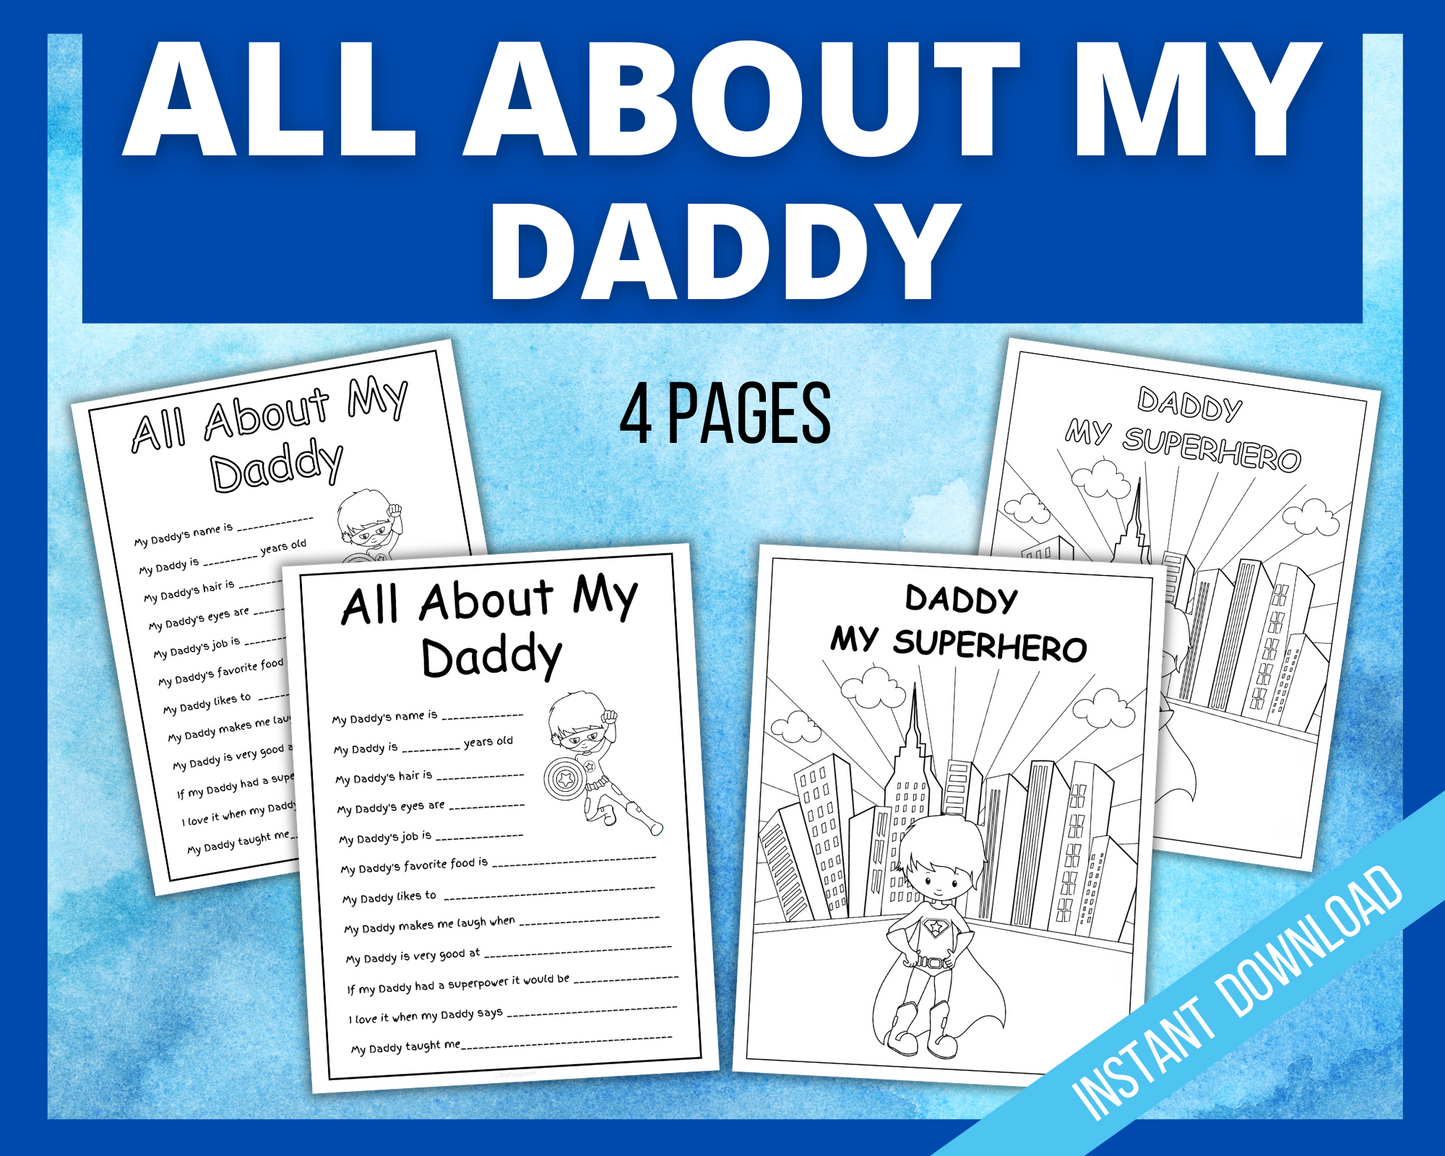 All about my daddy pages